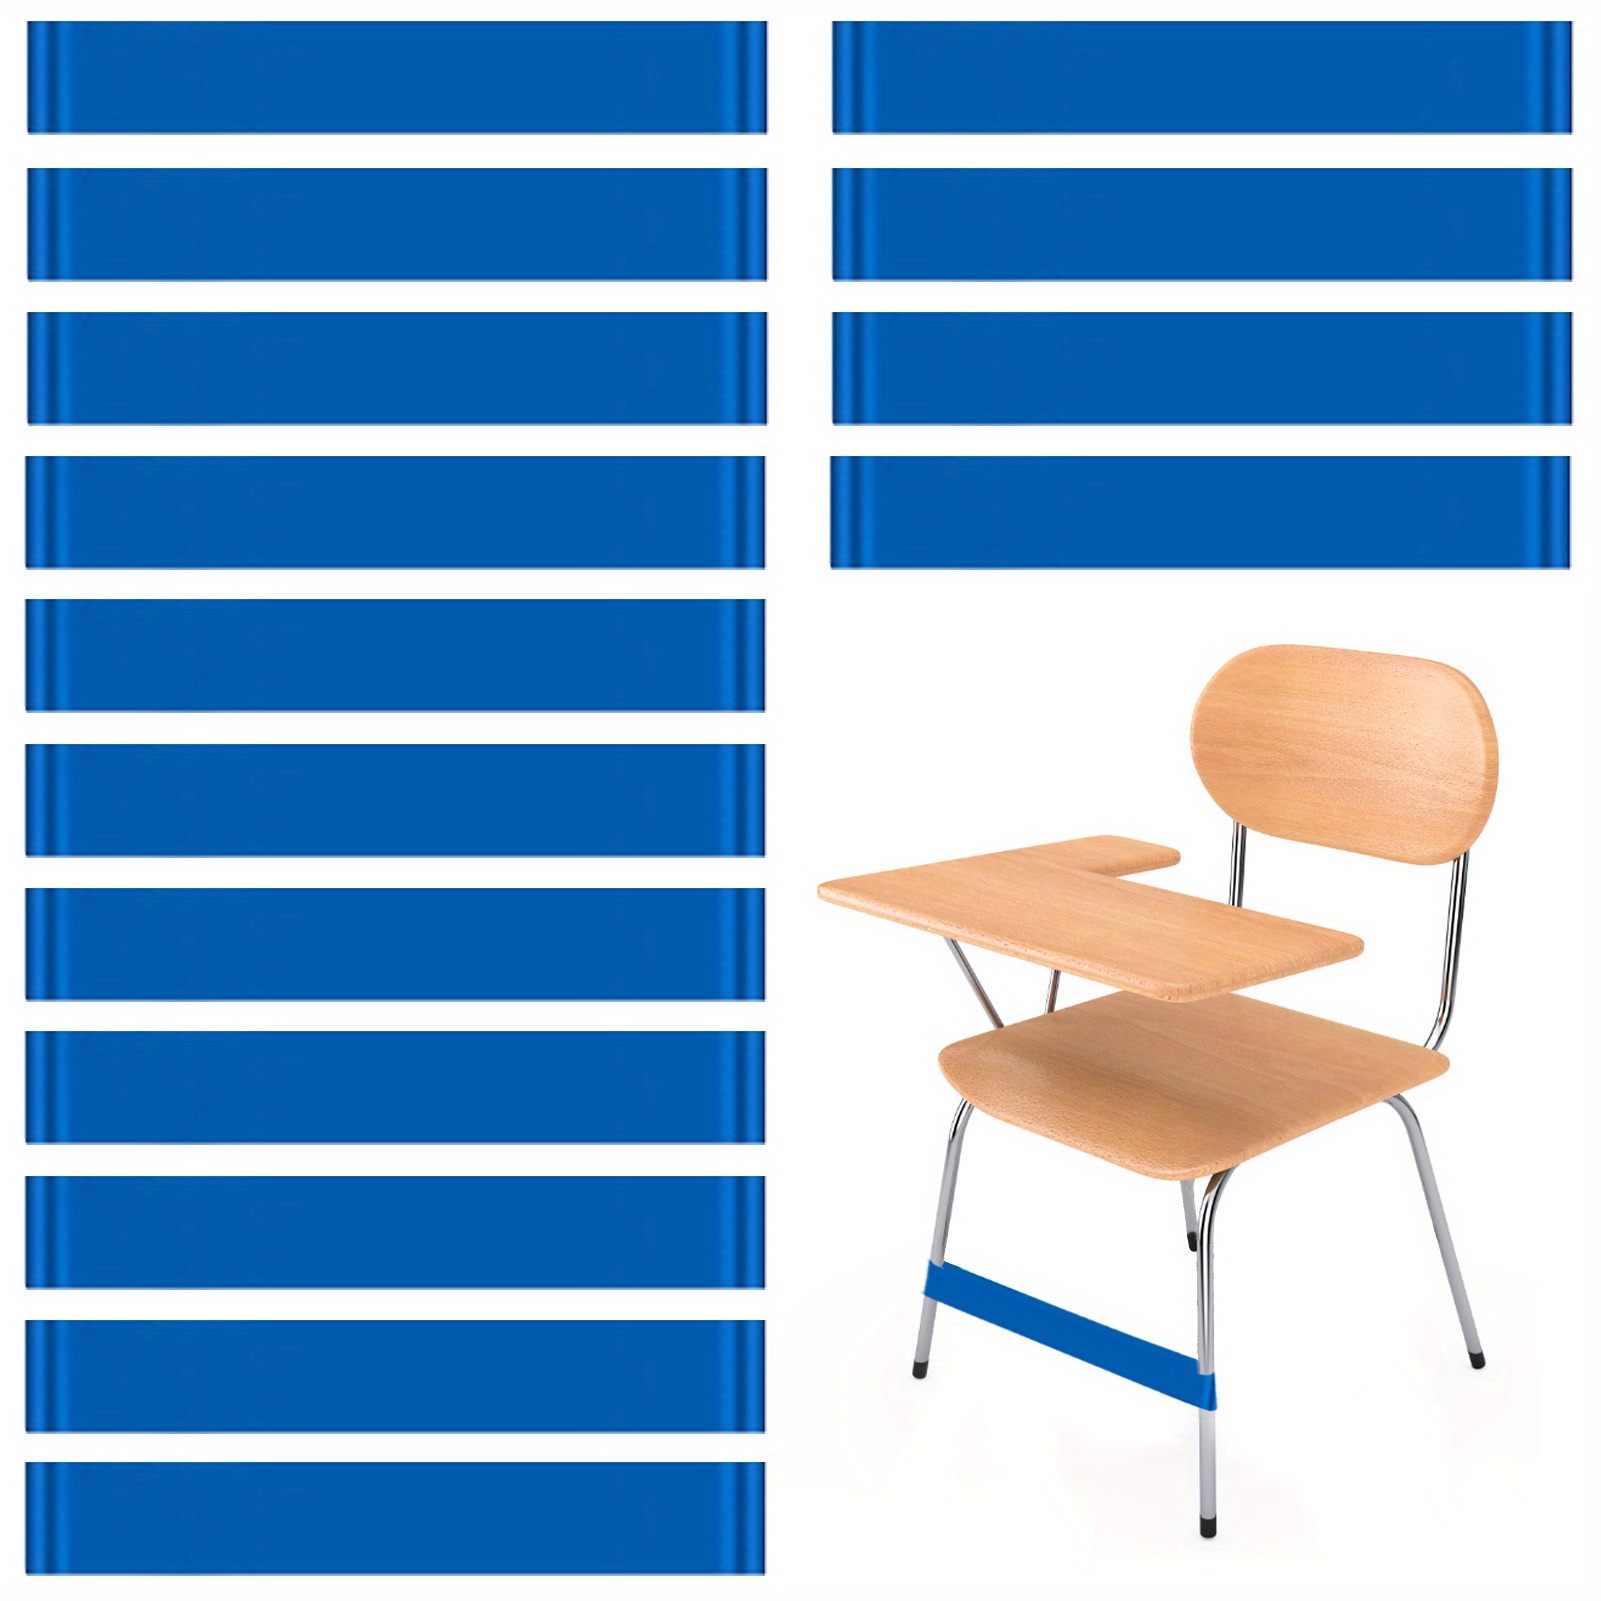 Classroom Chair Bands For Students With Fidgety Feet Inspirational Fidget  Bands For Classroom Chair Bands With Adhd Sensory Needs Flexible Seating  For School Students - Temu